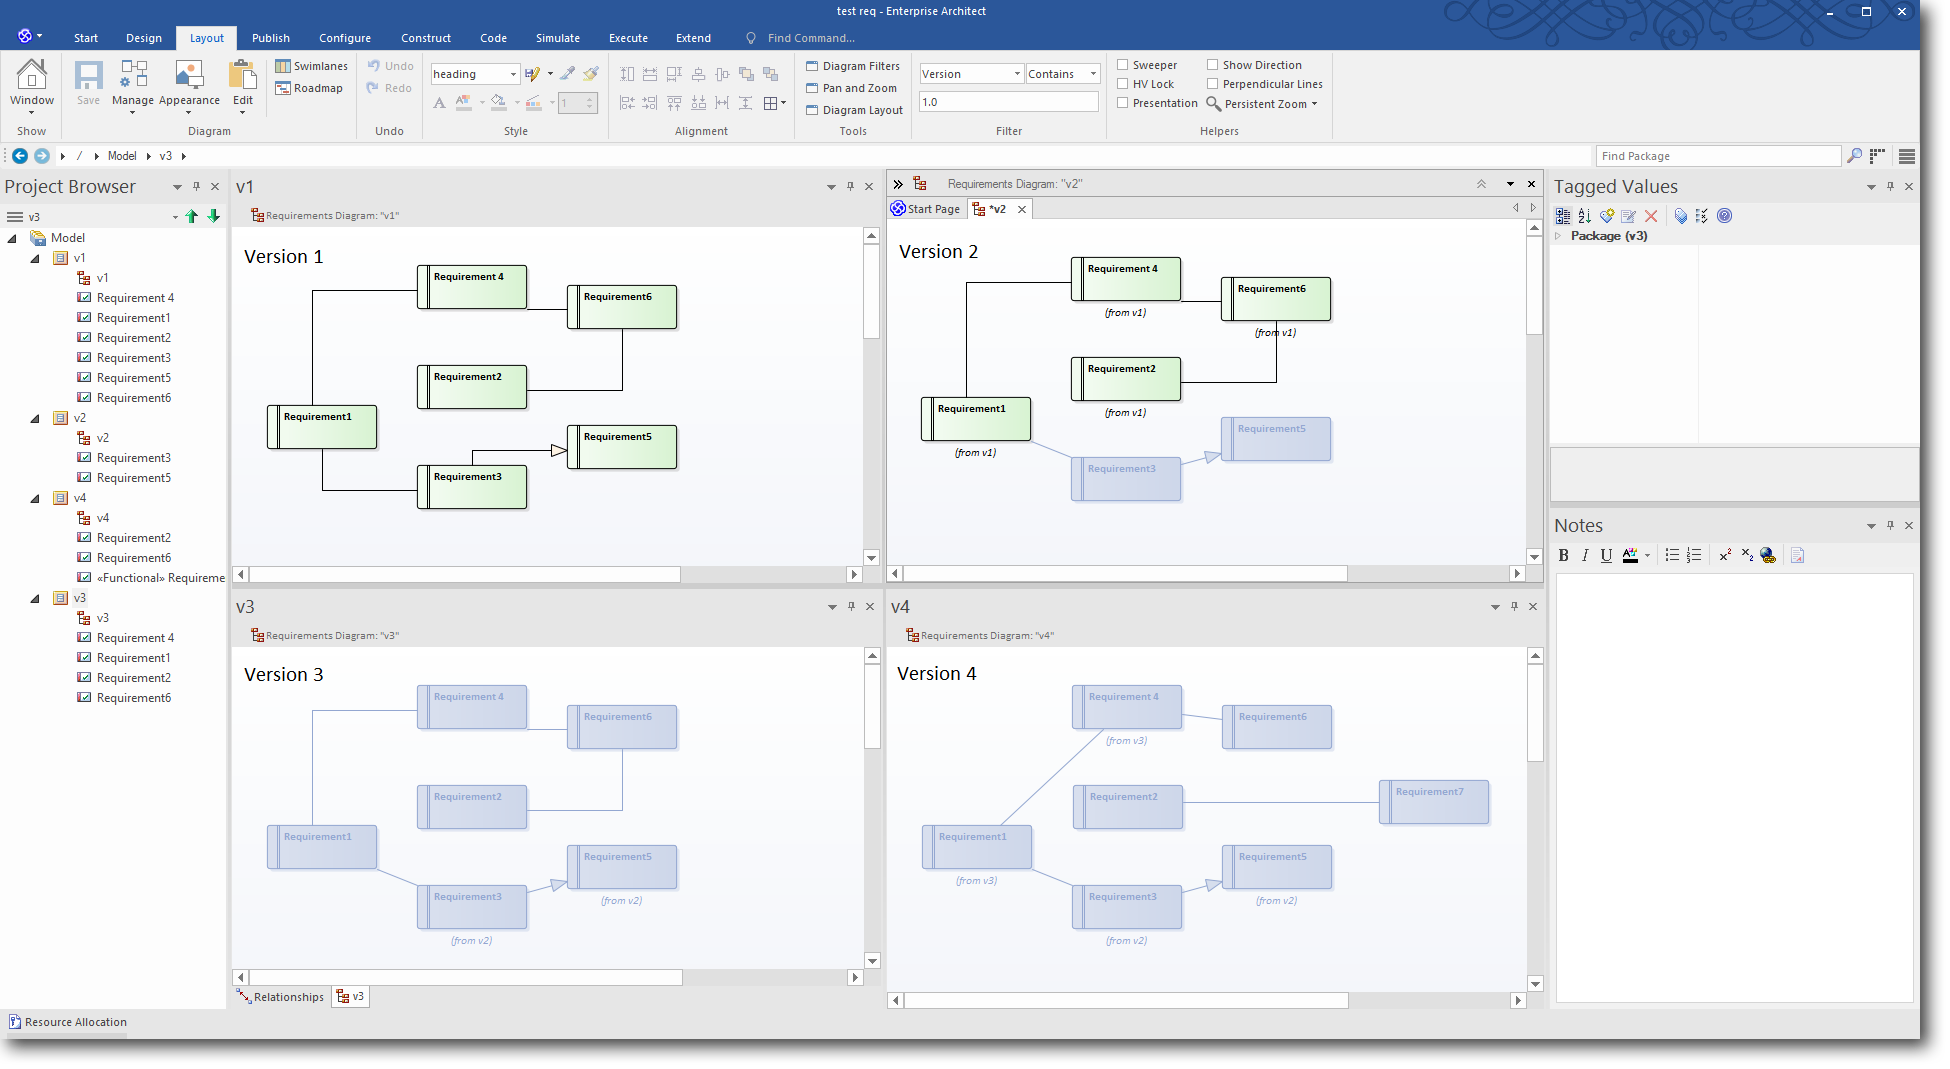 Enterprise Architect 13: Time Aware Modeling - Using a Diagram Filter to highlight Version 1.0 elements